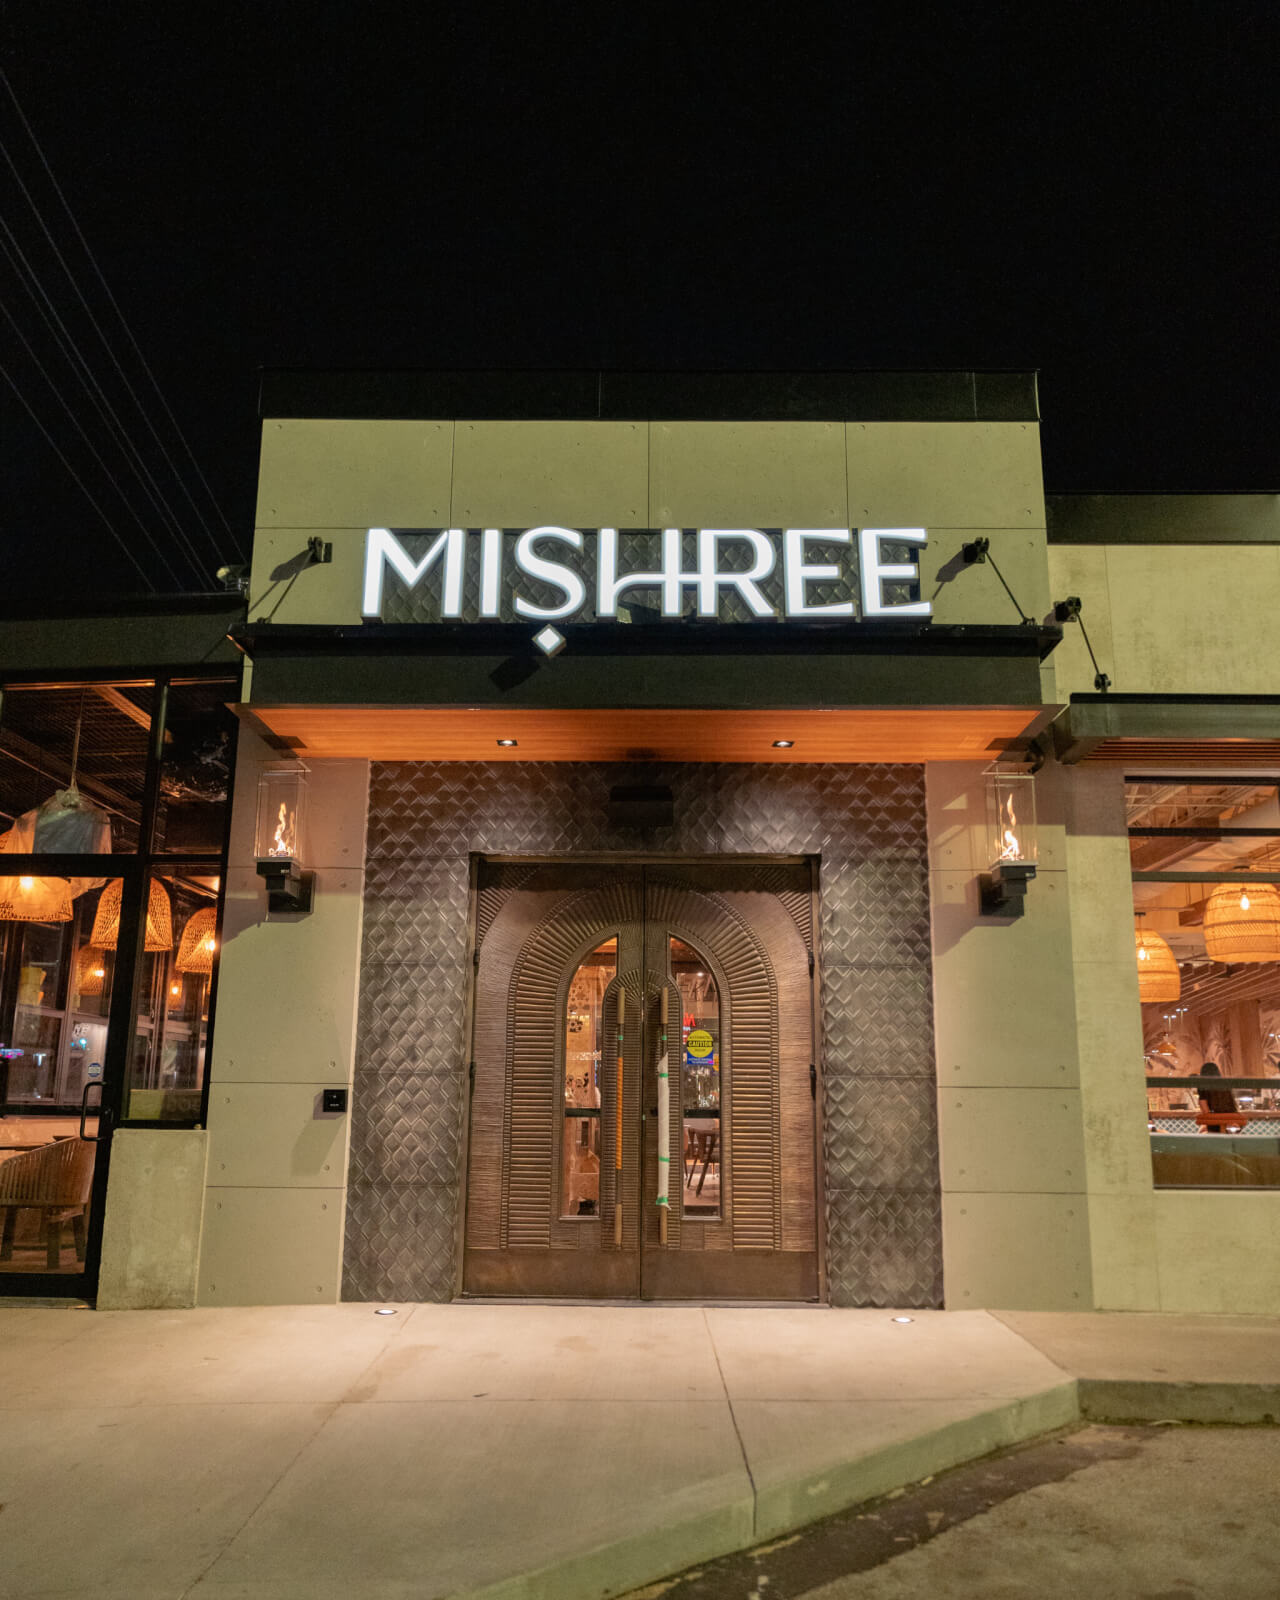 Hot New Spot Alert: Mishree Cocktails & Cuisine Exhilarates With South Asian X Middle Eastern Cuisine